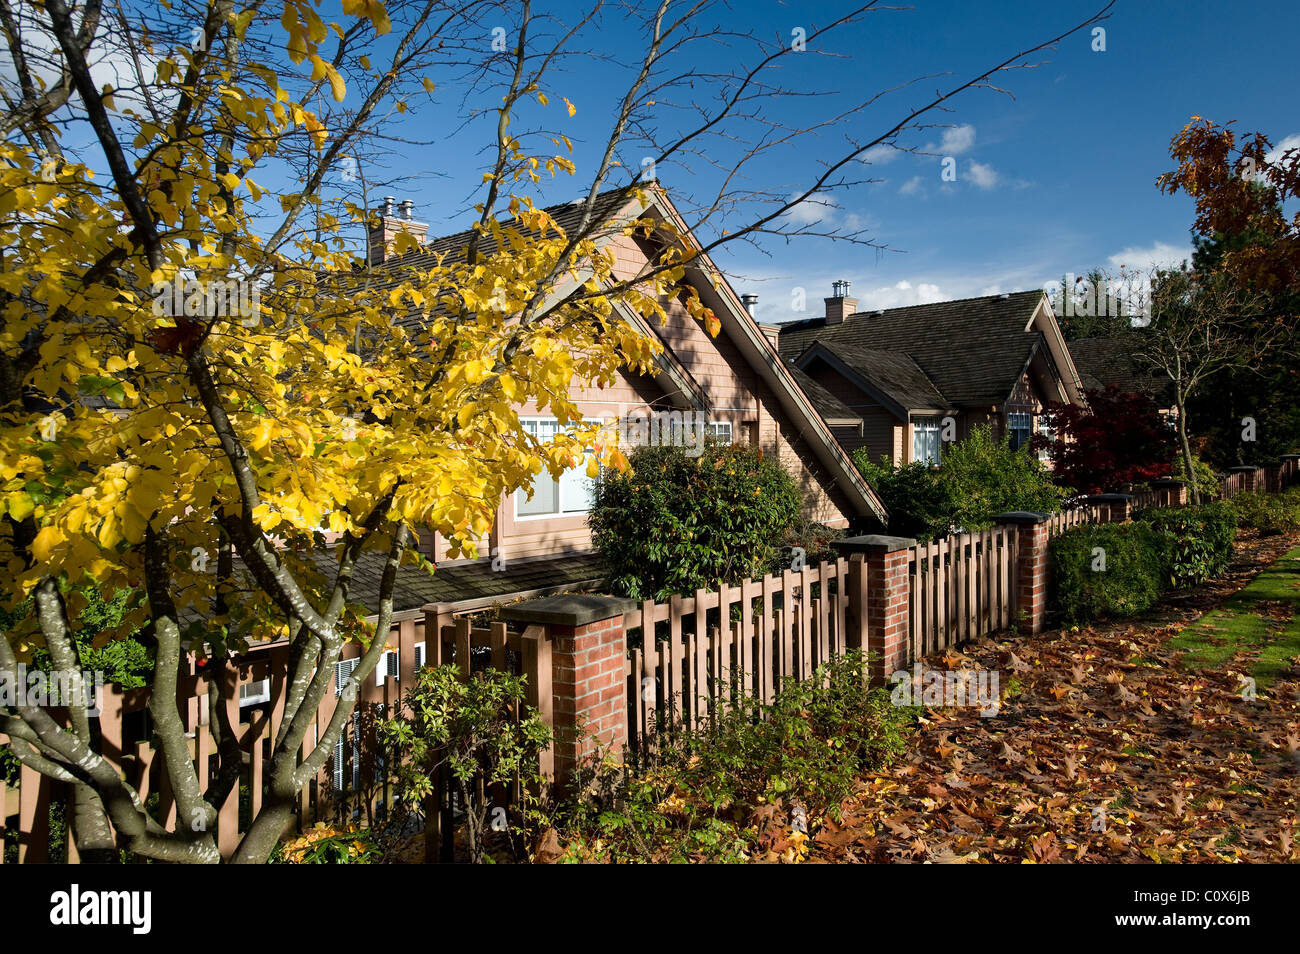 Residential home with fence and yellow tree Stock Photo